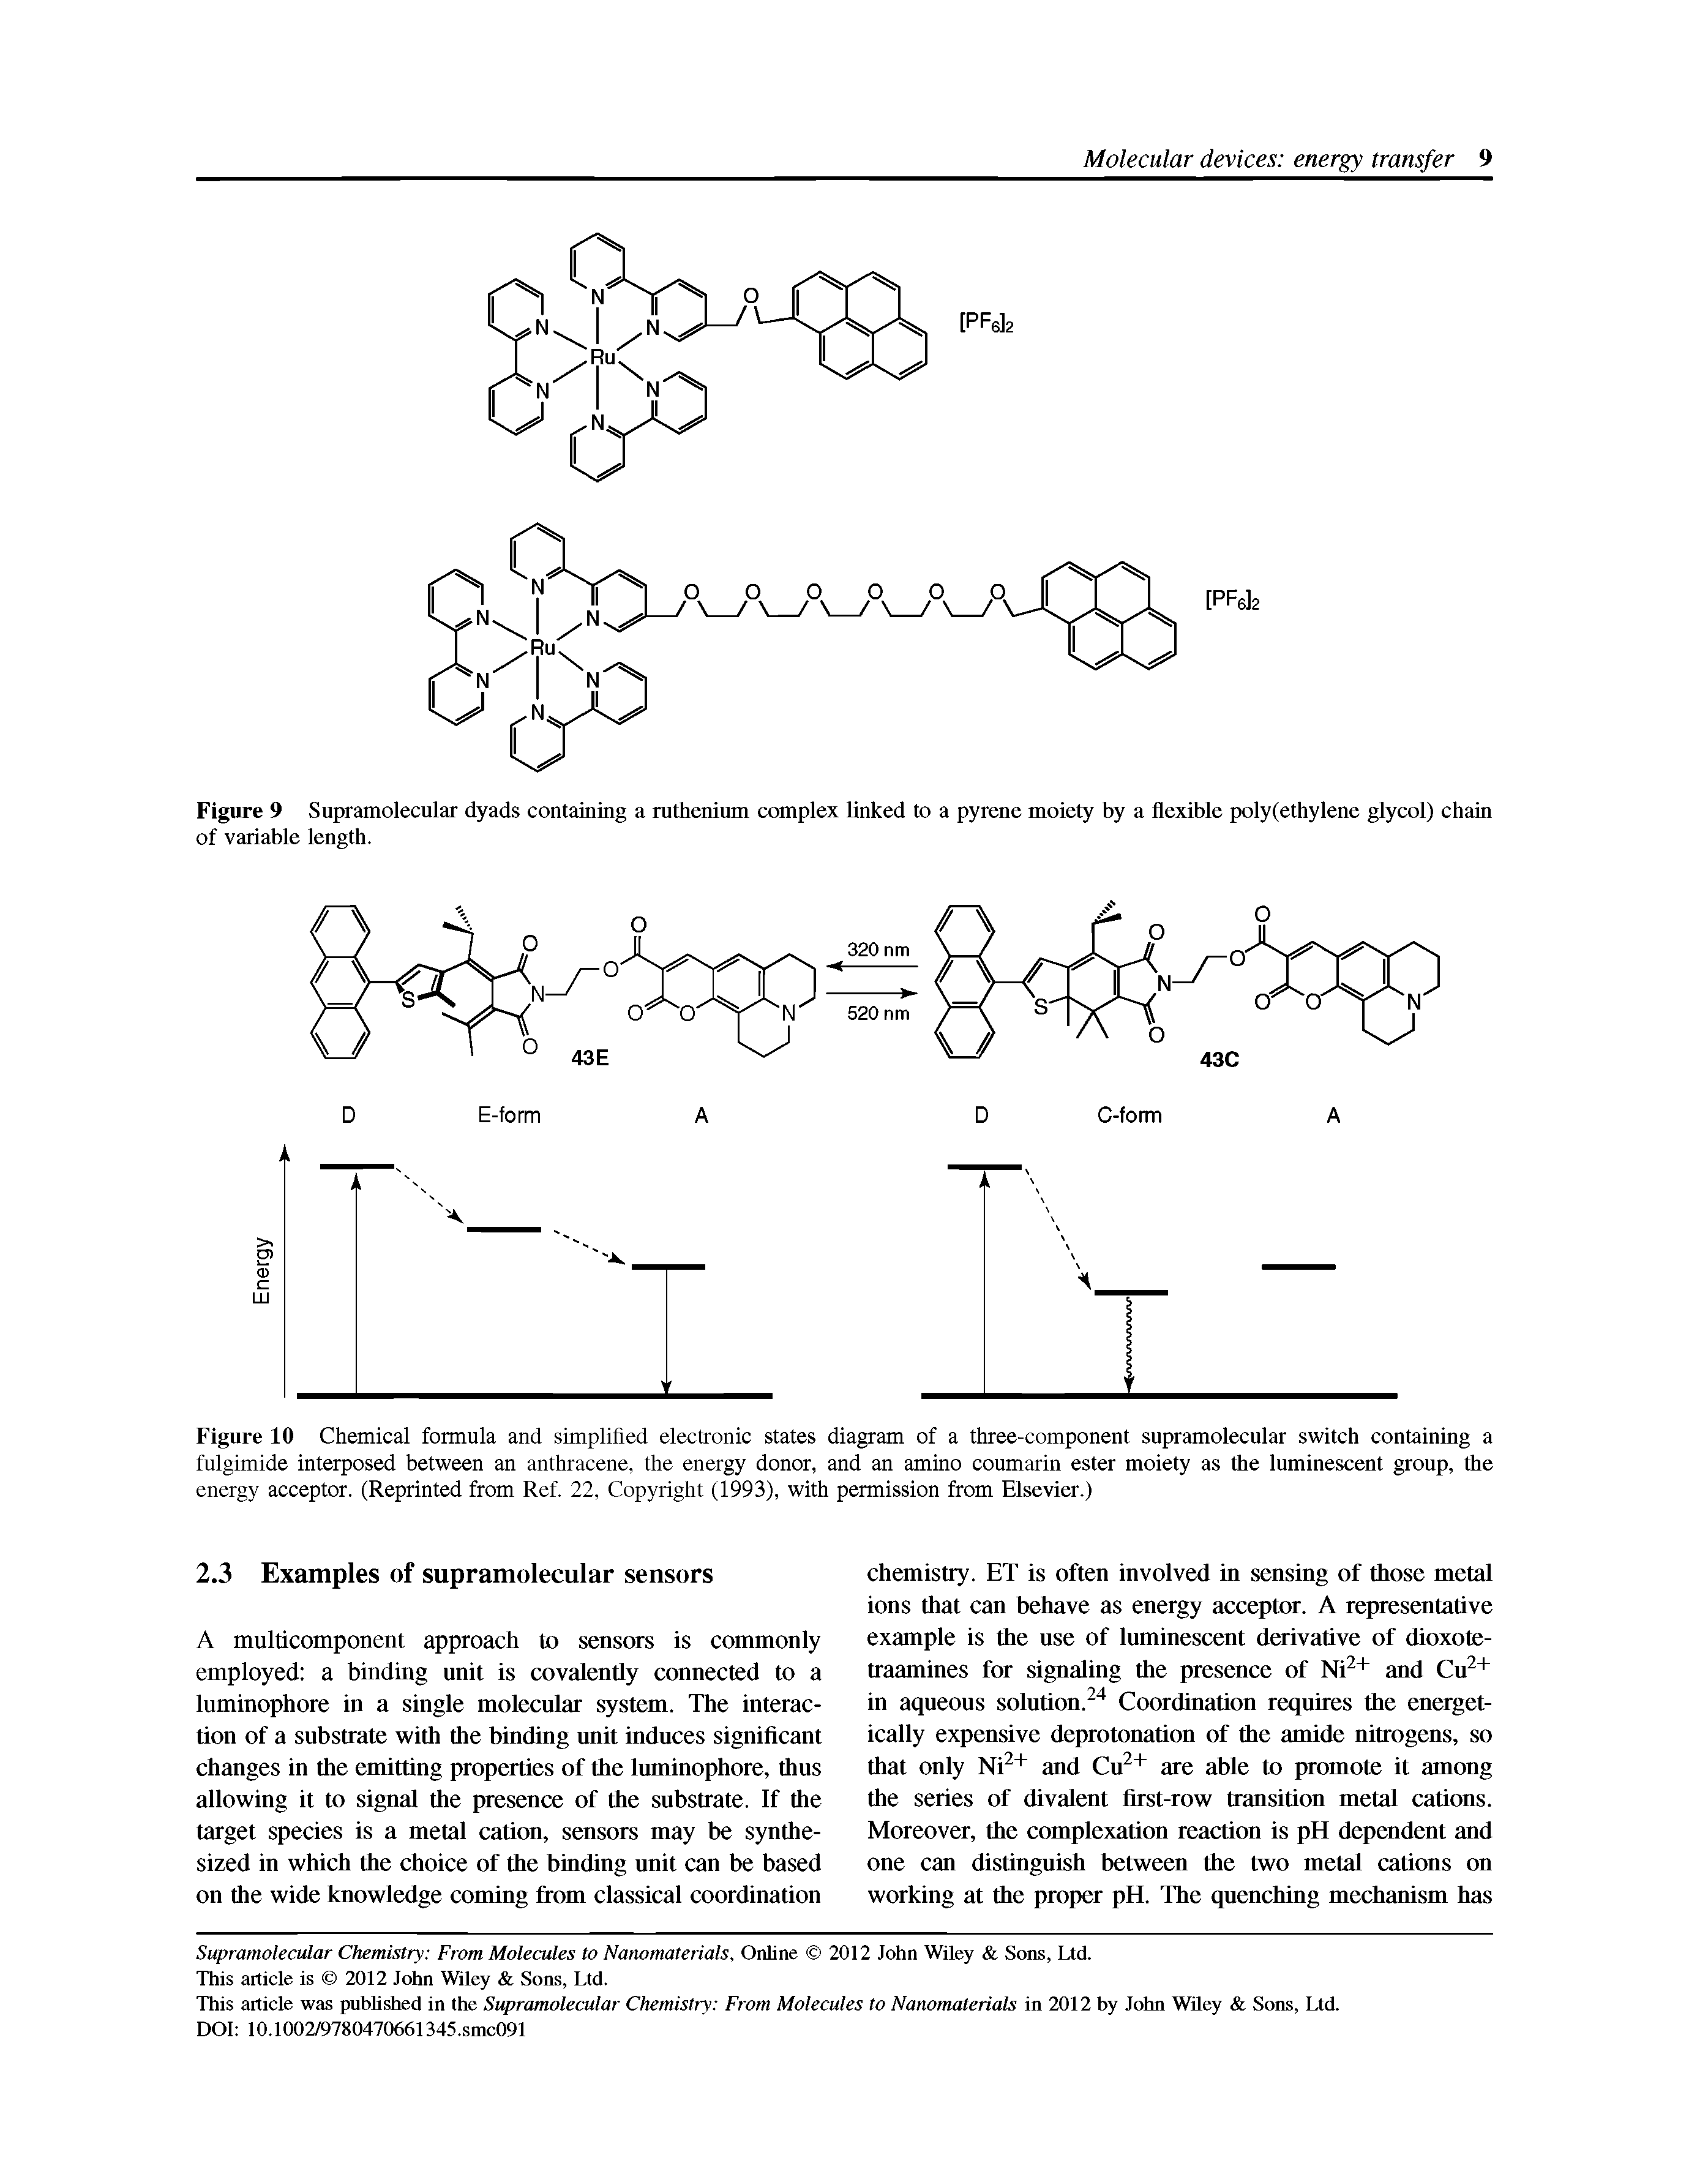 Figure 10 Chemical formula and simplifled electronic states diagram of a three-component supramolecular switch containing a fulgimide interposed between an anthracene, the energy donor, and an amino coumarin ester moiety as the luminescent group, the energy acceptor. (Reprinted from Ref. 22, Copyright (1993), with permission from Elsevier.)...